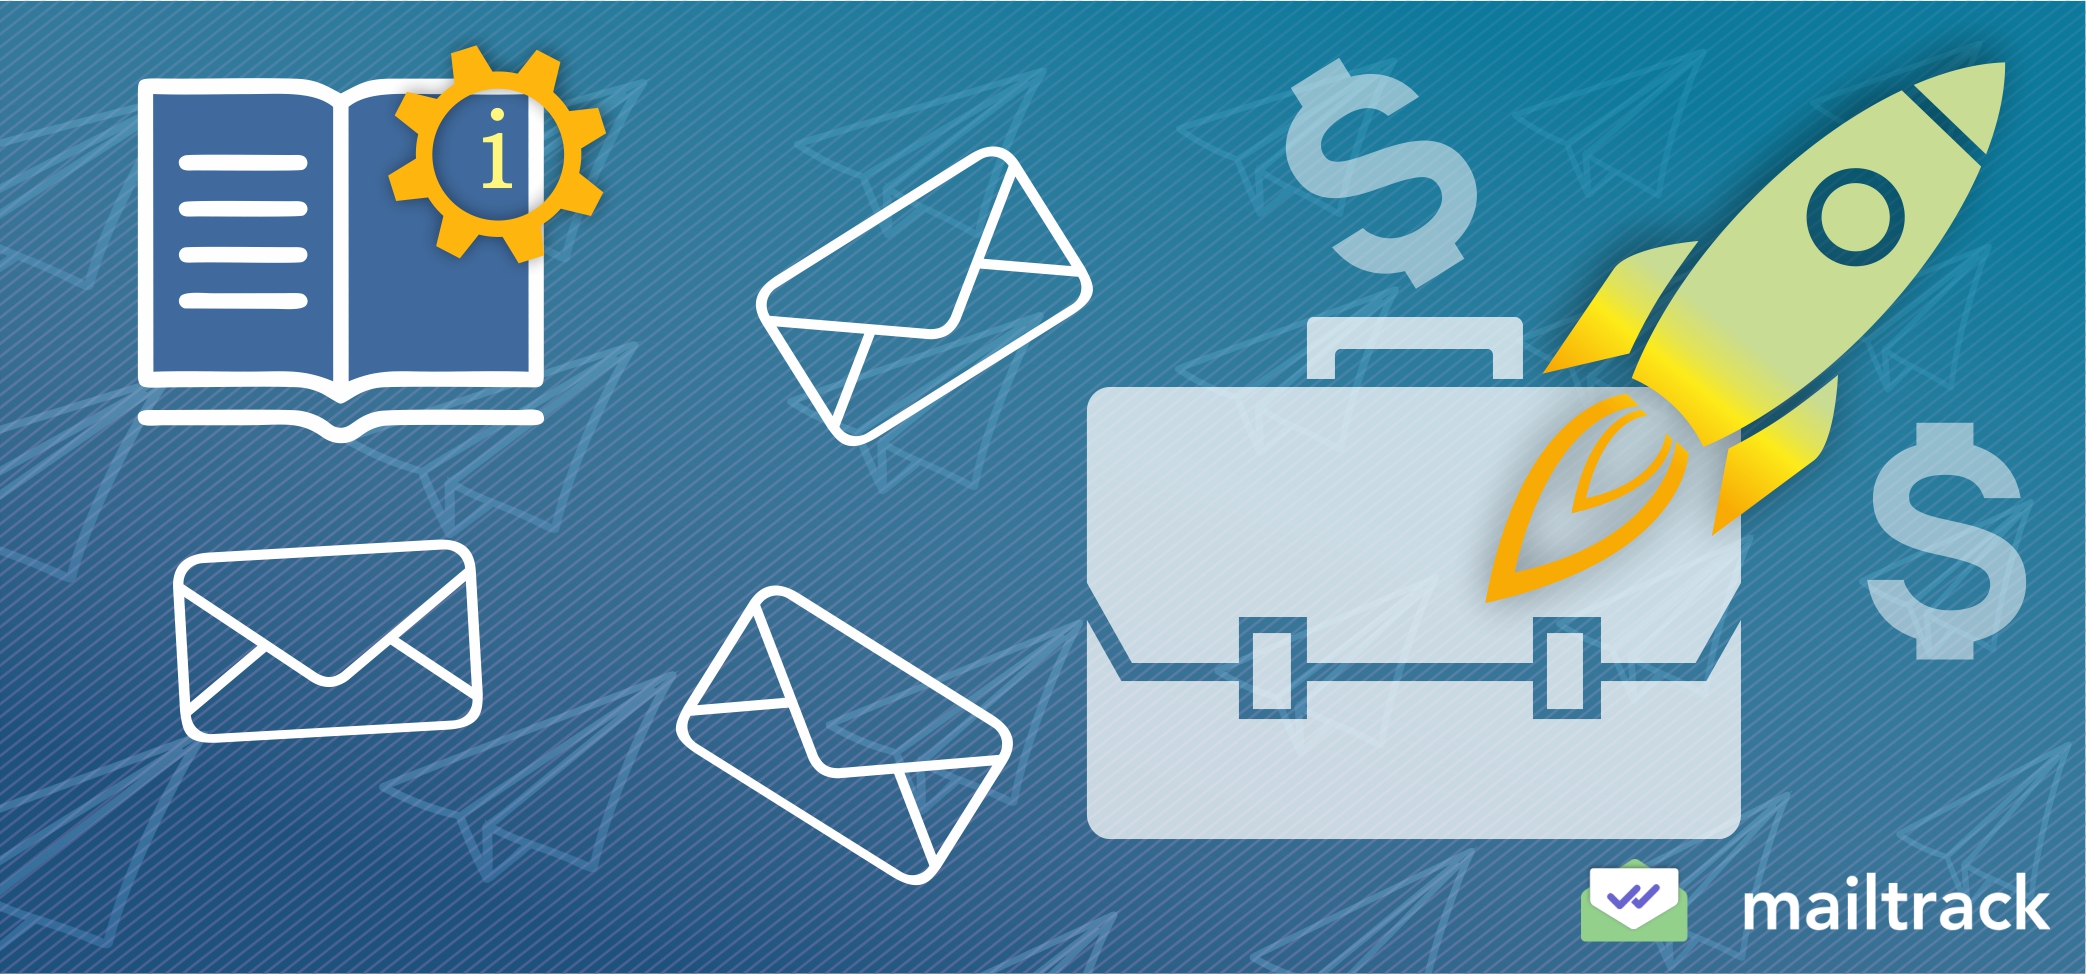 email marketing for small business